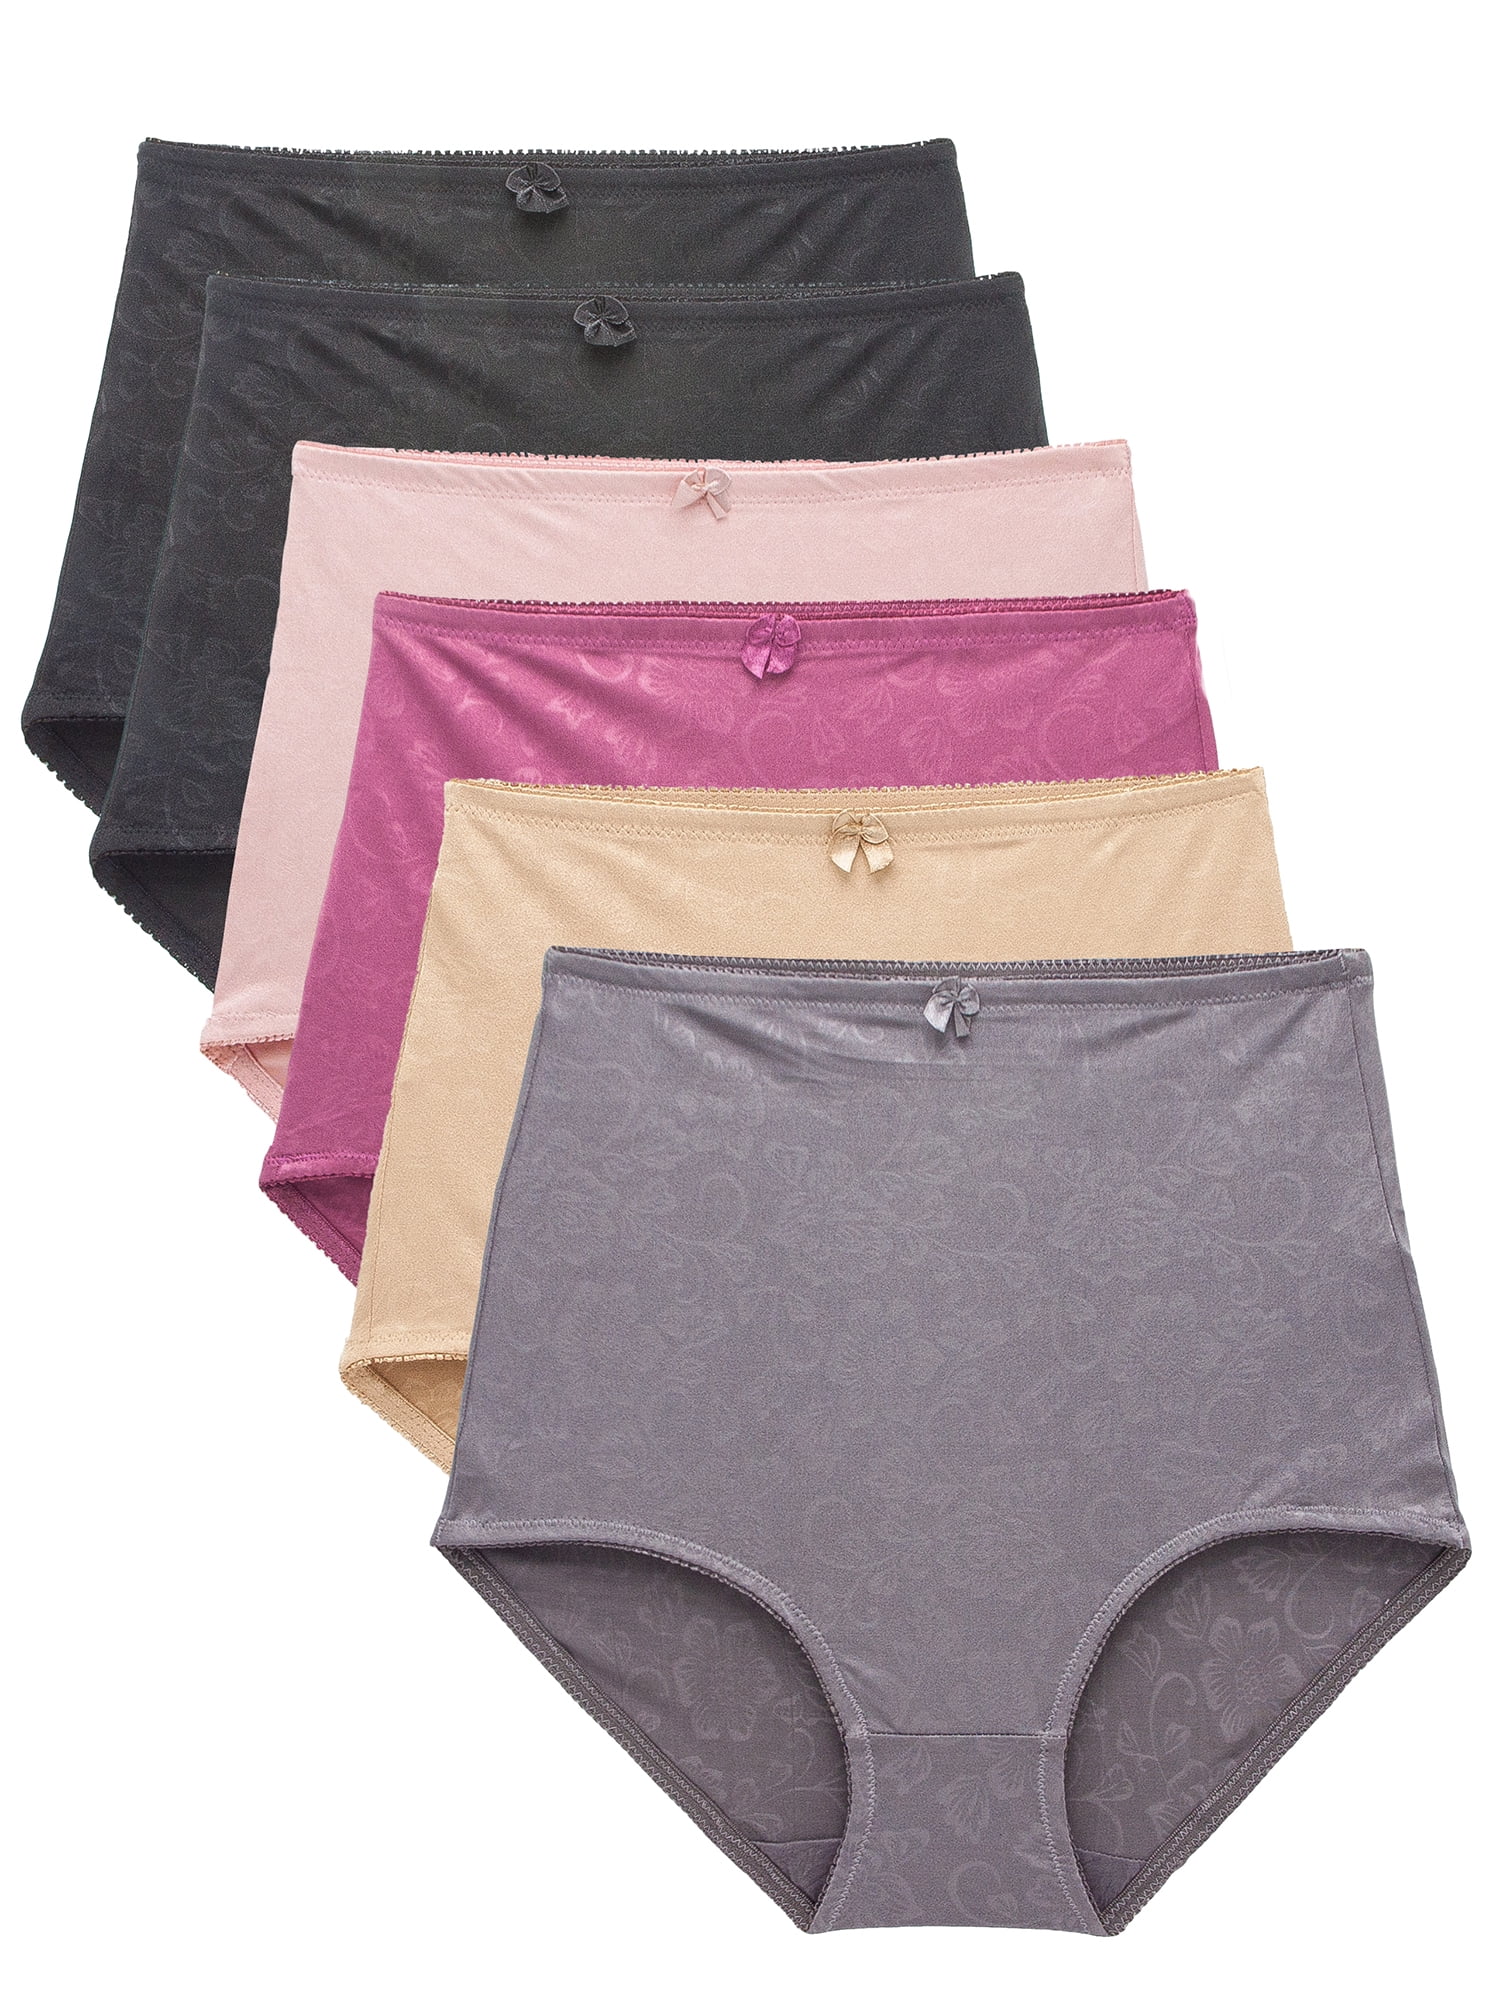 B2BODY Breathable underwear for women Regular & Plus Size Panties 4 Pack  Brief (Medium) at  Women's Clothing store